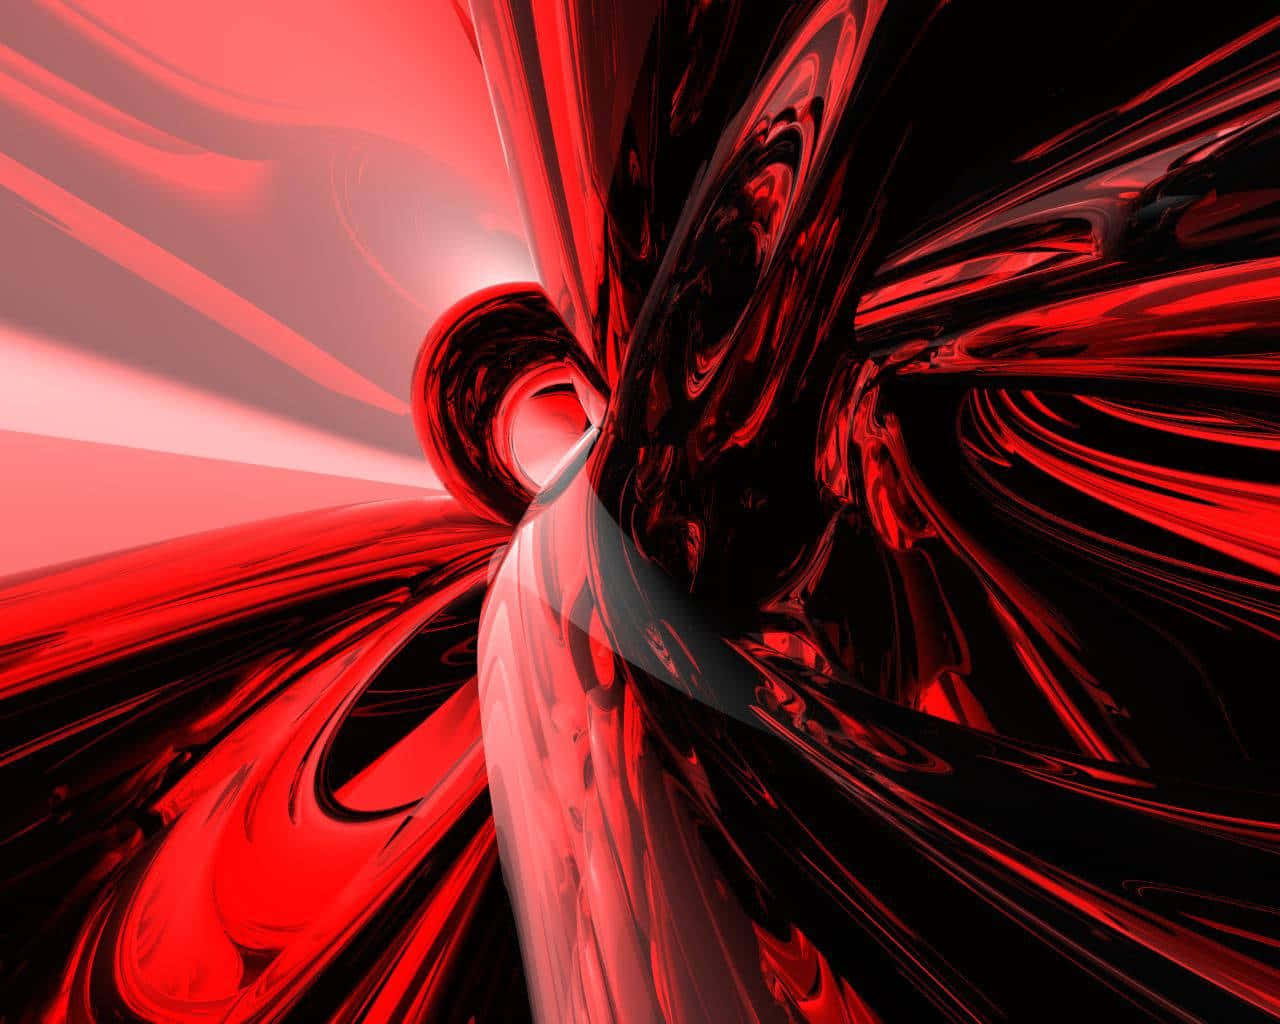 A Red Abstract Background With Black And White Swirls